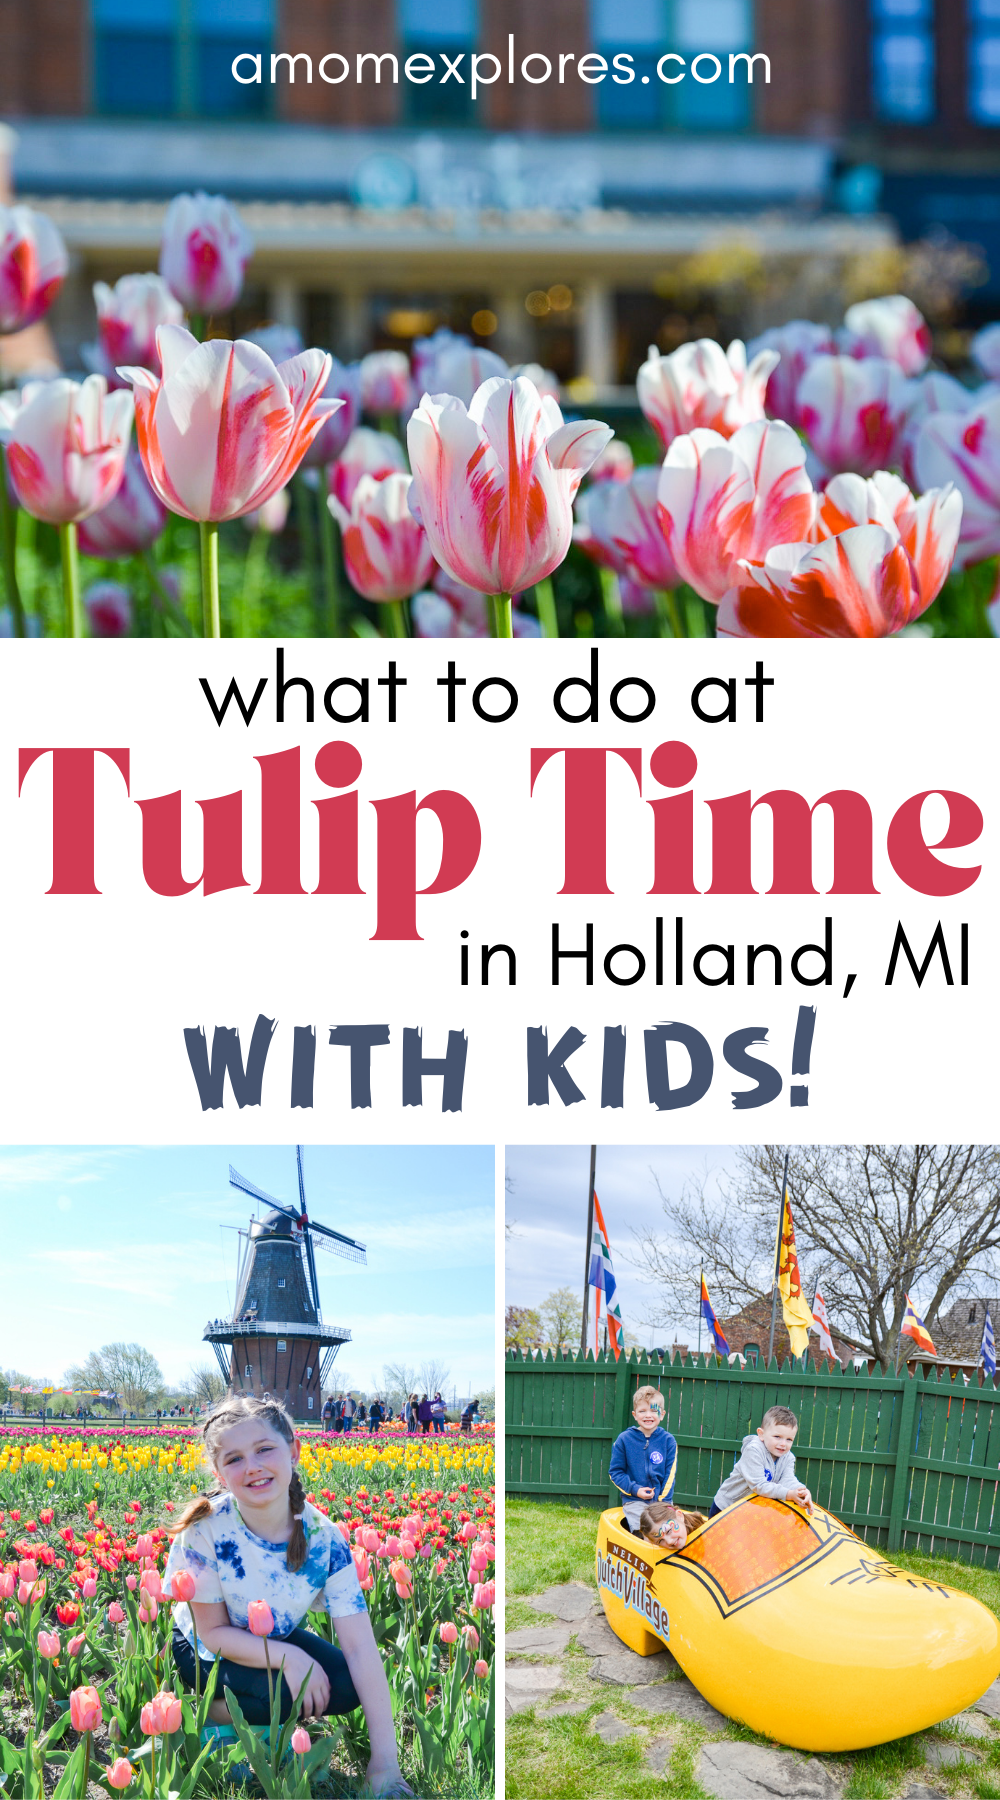 What to Do at Tulip Time in Holland, MI with Kids.png